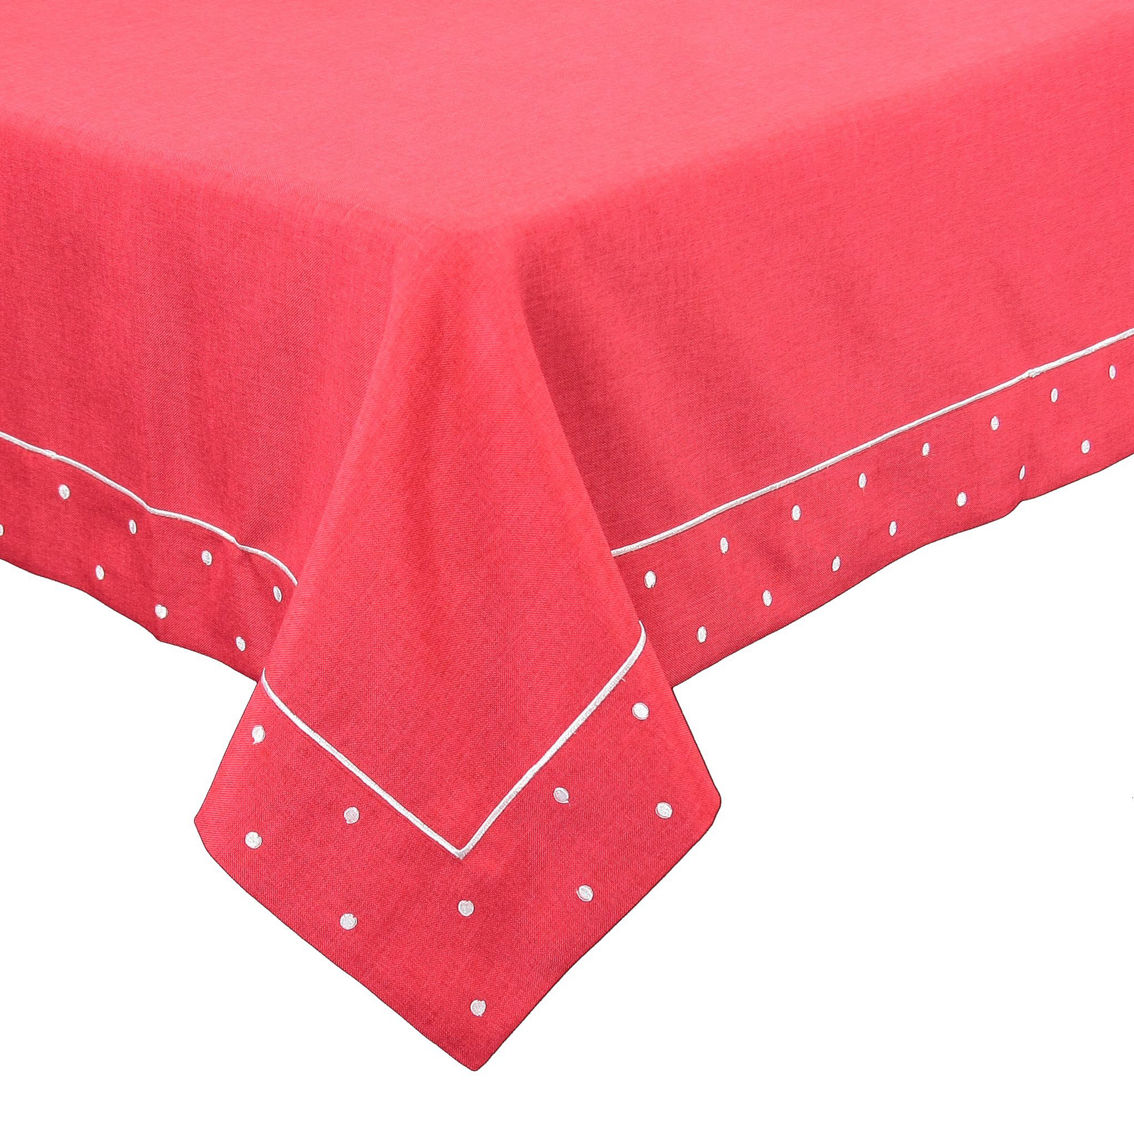 Xia Home Fashions, Polka Dot Embroidered Easy Care Tablecloth 60In by 84In, Red - Image 2 of 2